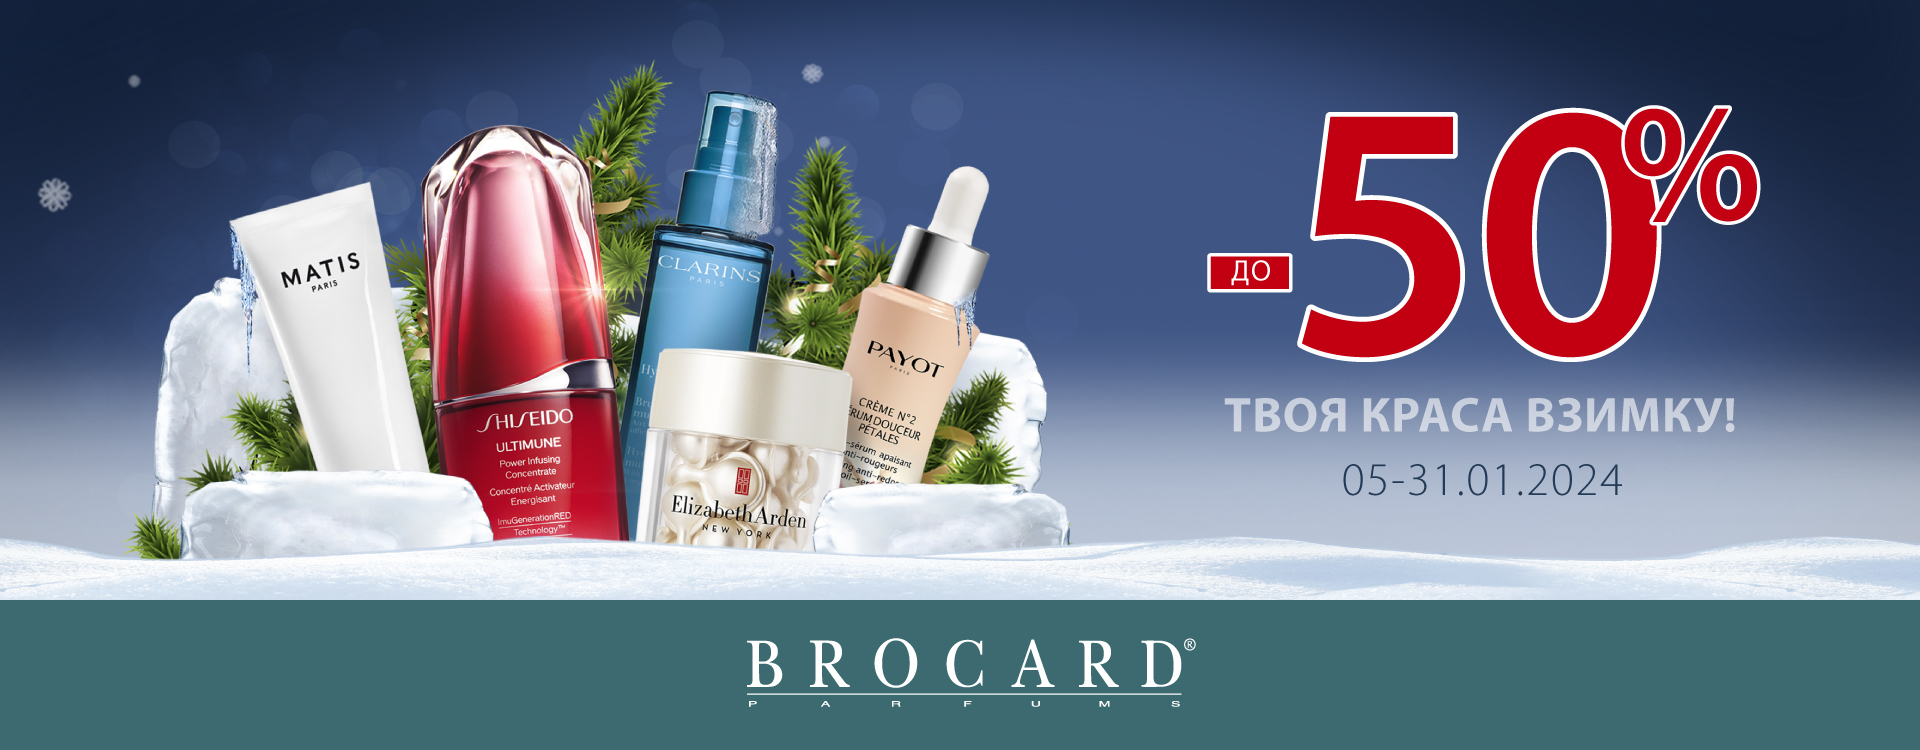 Discounts up to 50% at BROCARD